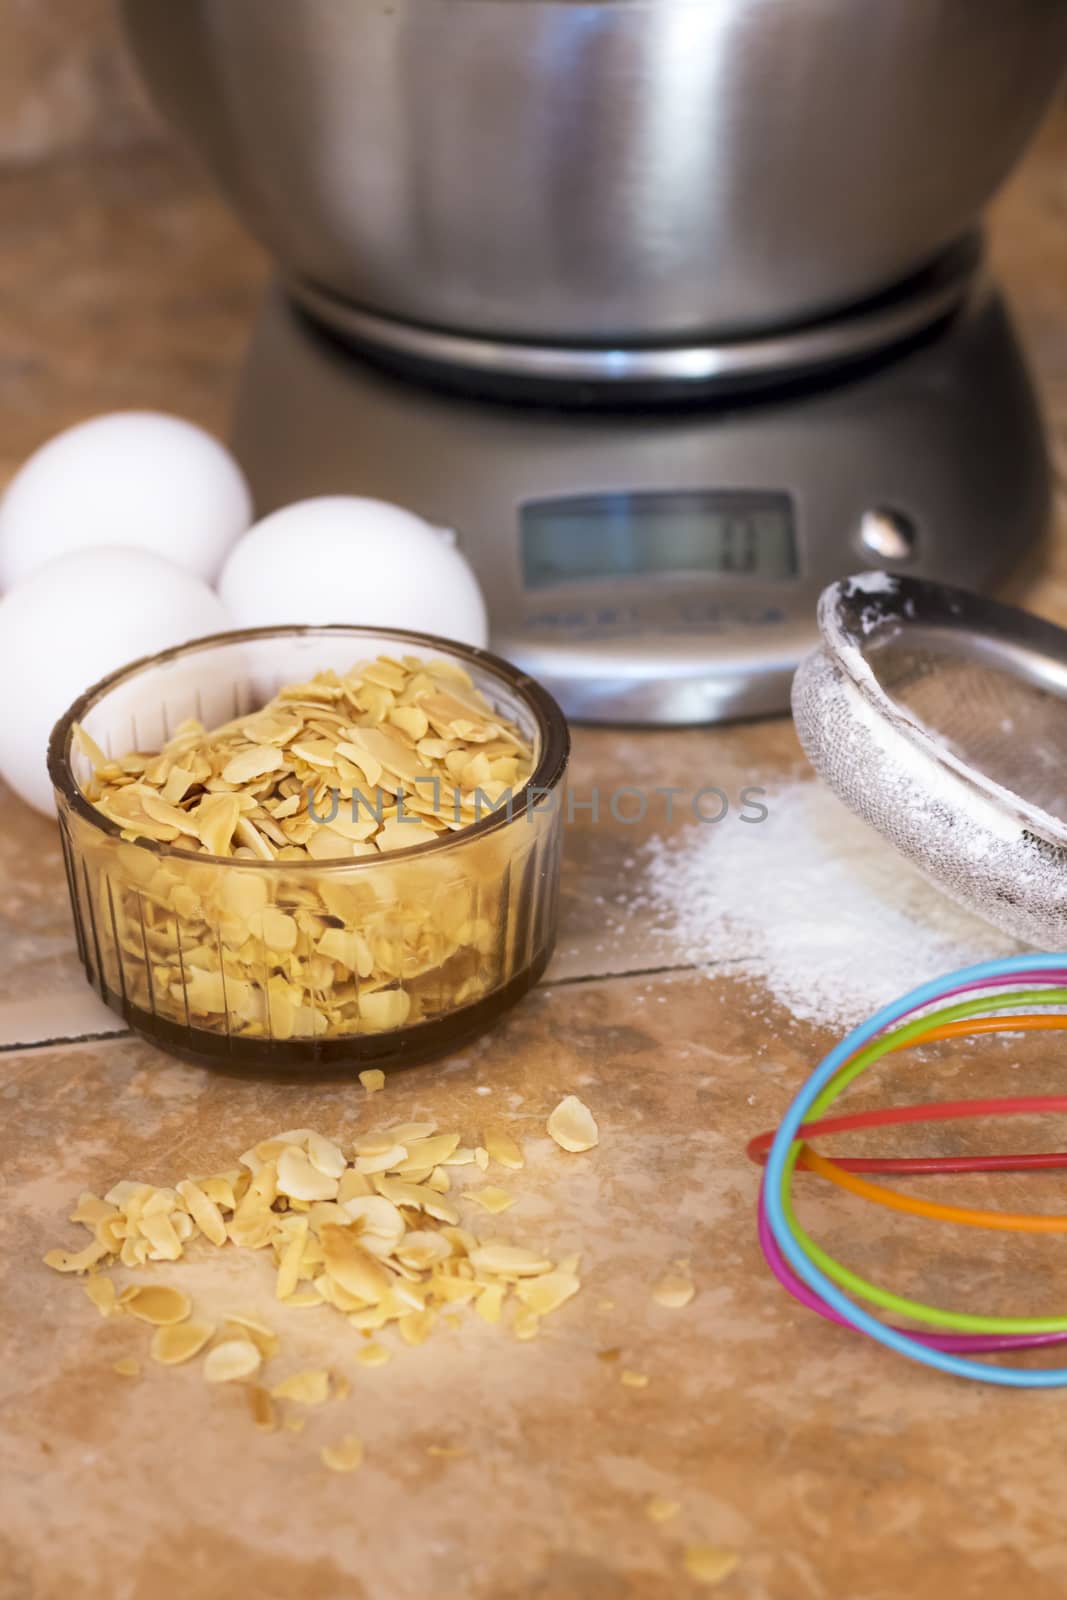 three eggs,sliced almonds and gray metal scale,sieve flour and colorful whip by sigoisette